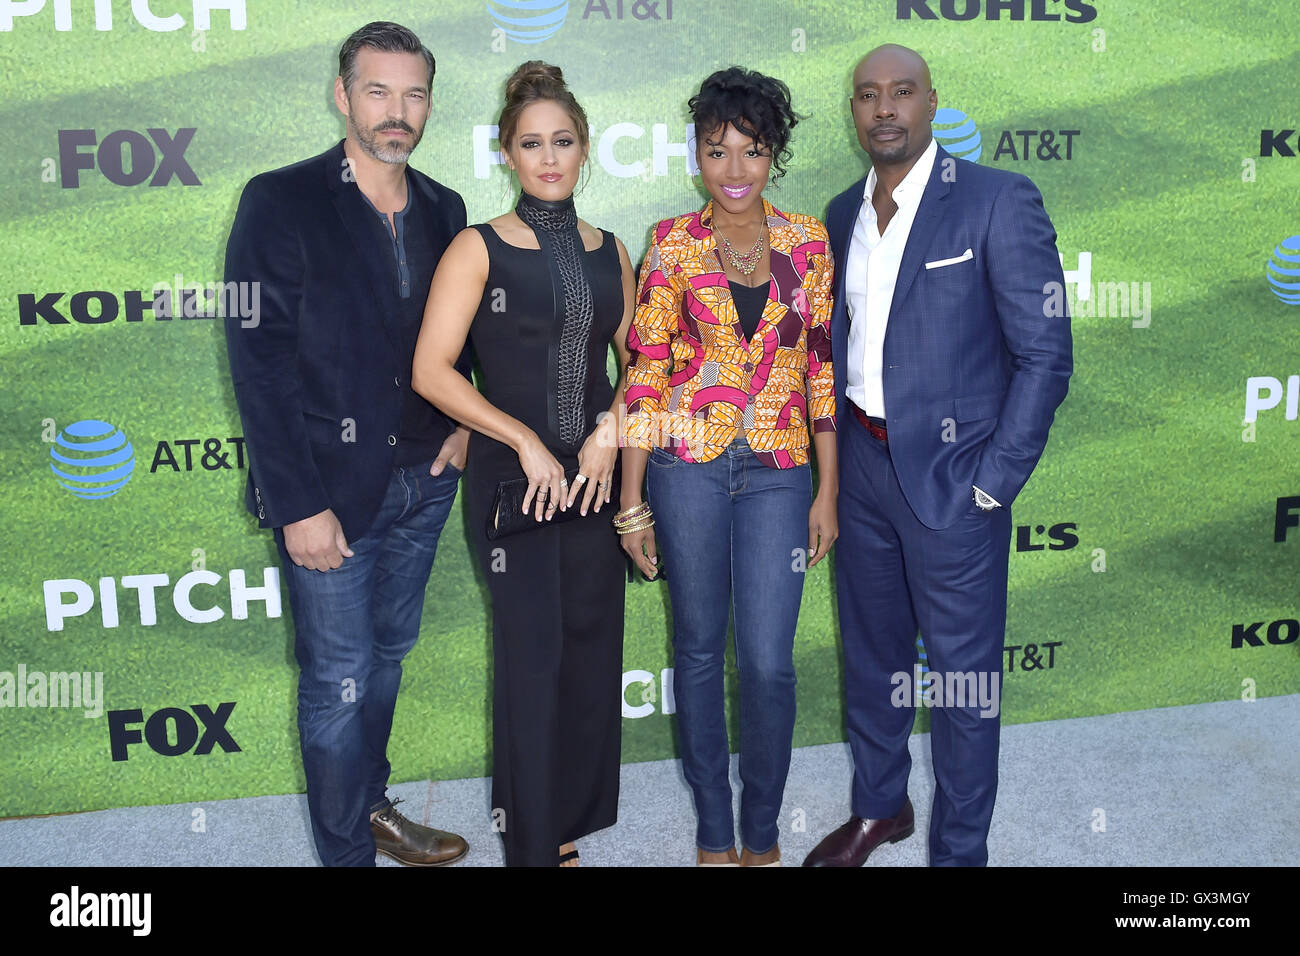 Los Angeles, California. 13th Sep, 2016. Eddie Cibrian, Jaina Lee Ortiz, Gabrielle Dennis and Morris Chestnut attend the premiere of Fox's 'Pitch' at West LA Little League Field on September 13, 2016 in Los Angeles, California. | Verwendung weltweit/picture alliance © dpa/Alamy Live News Stock Photo